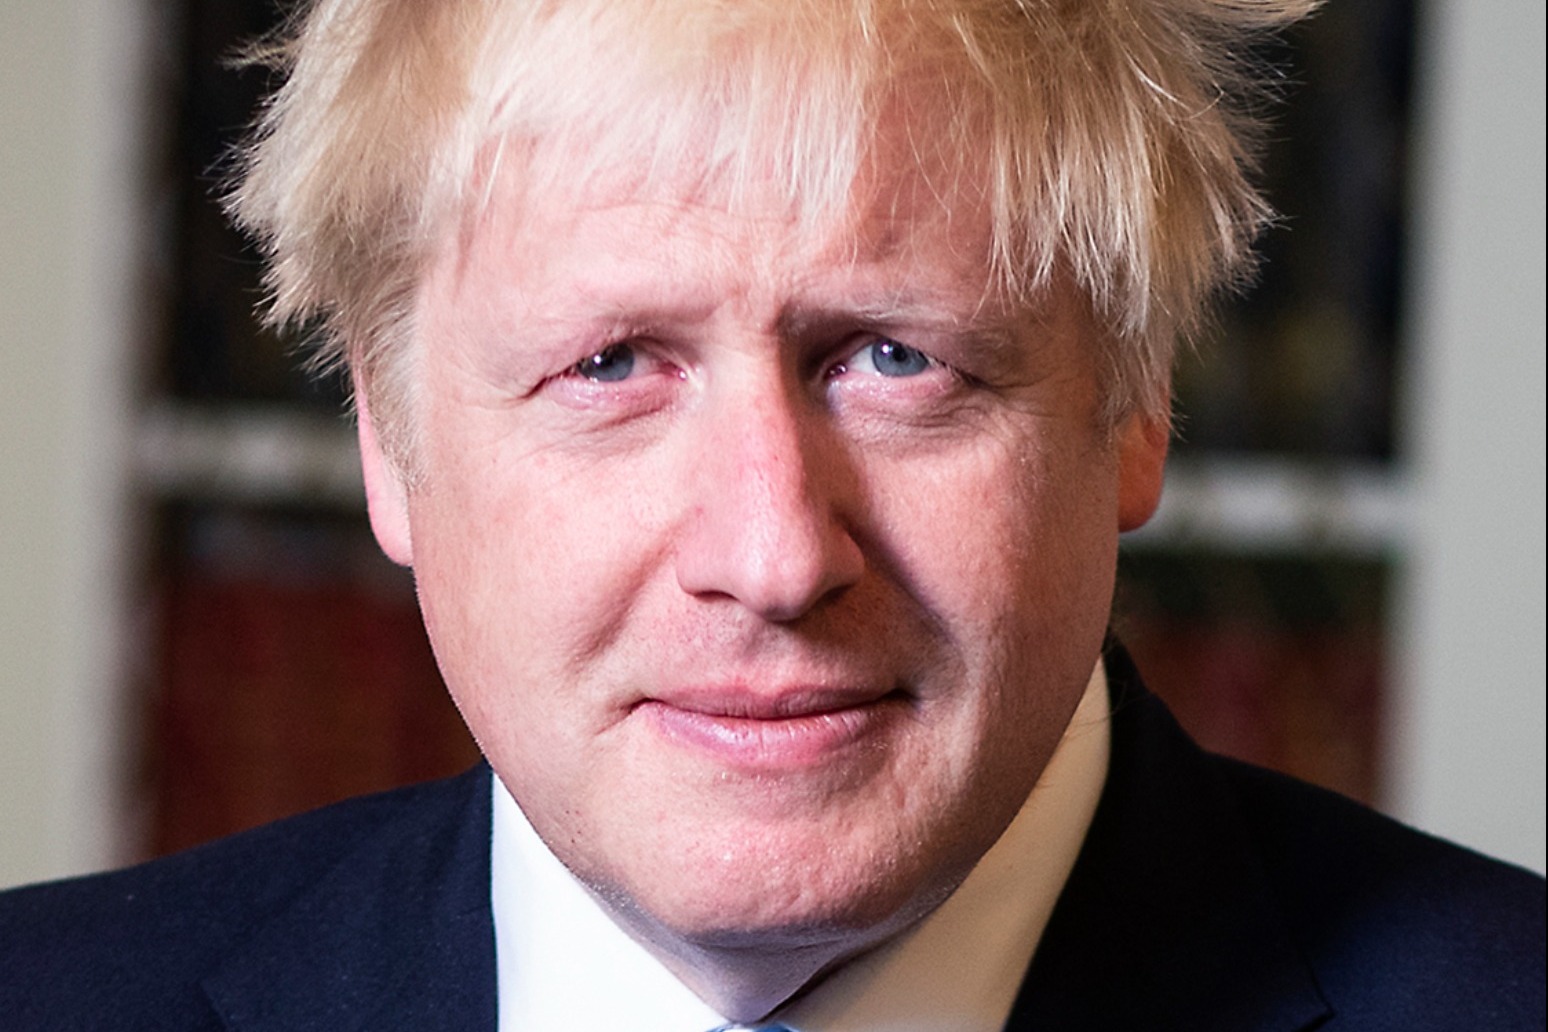 Increasing pressure on the NHS due to last for weeks – Johnson 